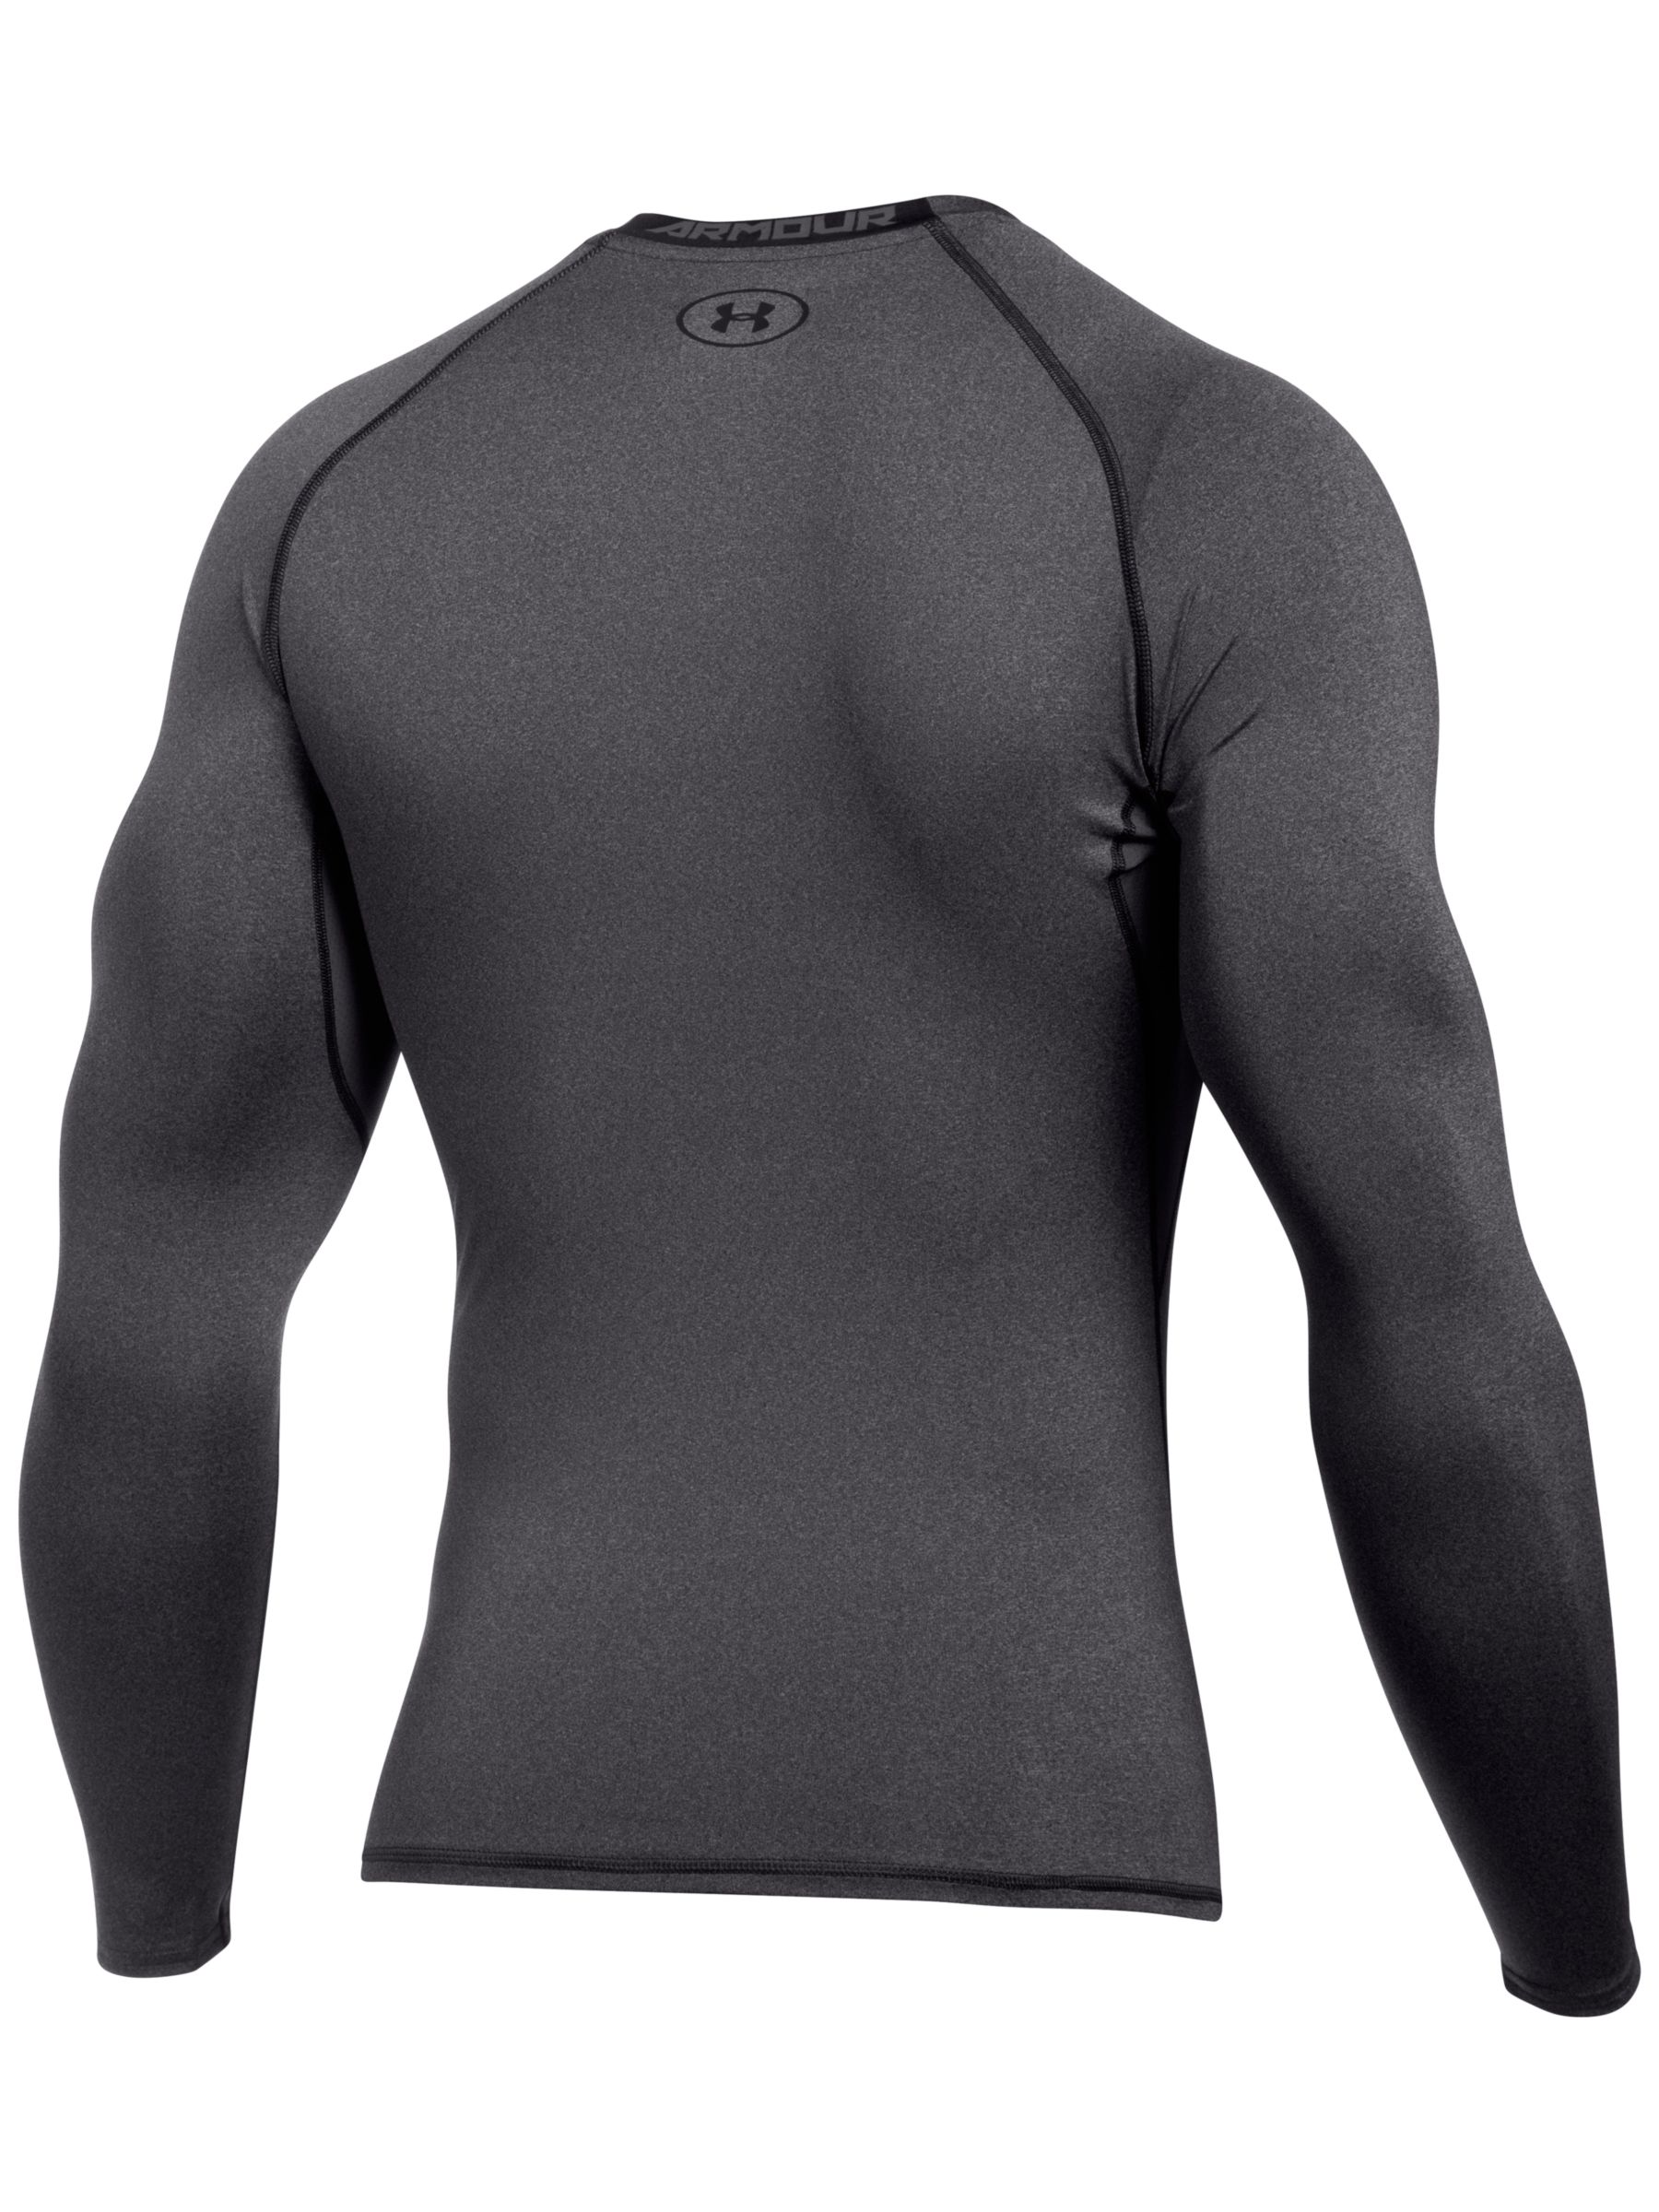 under armor long sleeve compression shirt